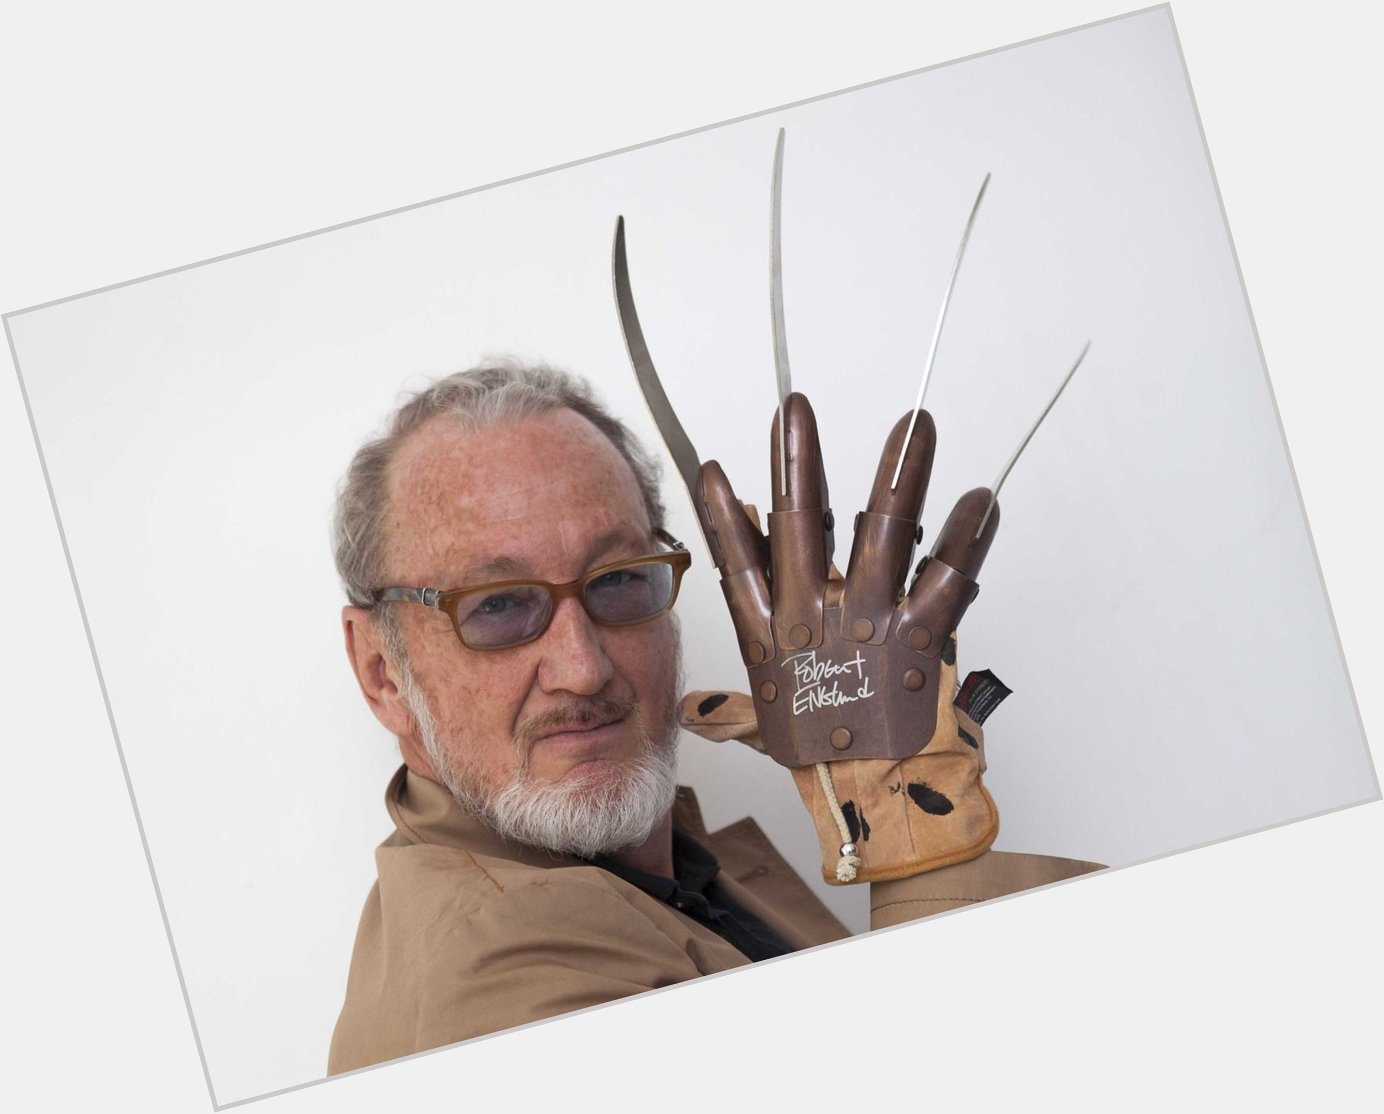 Happy 74th birthday to the one and only Robert Englund 